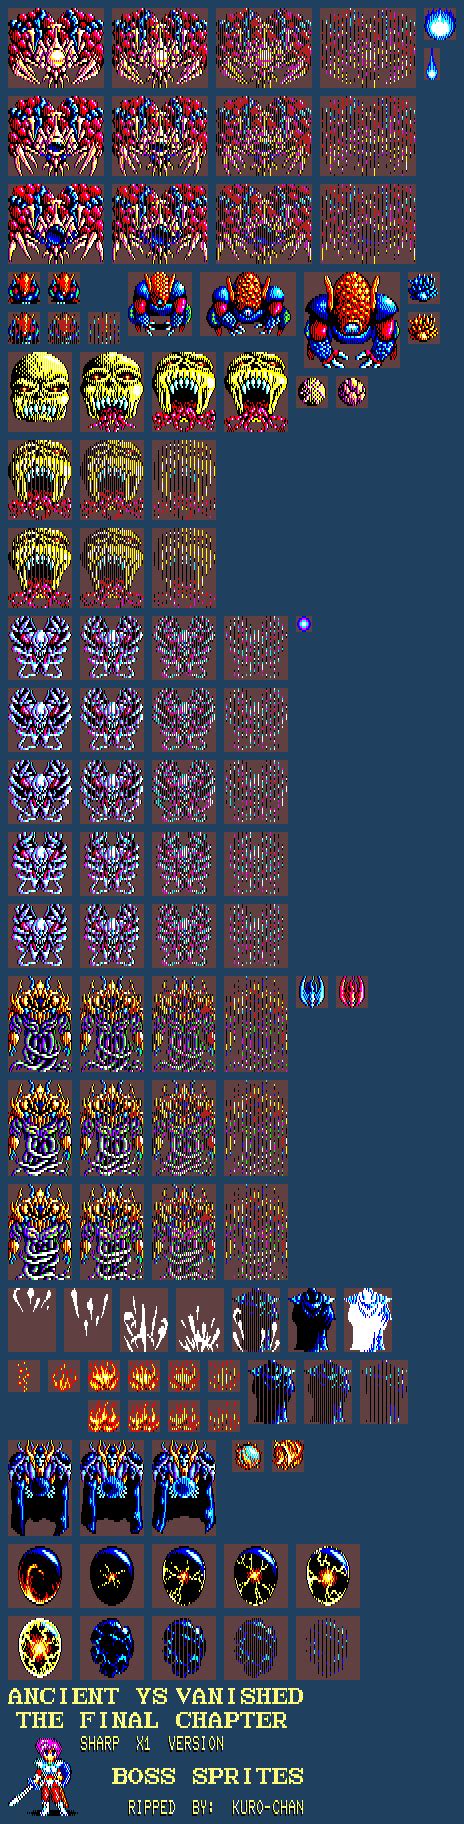 The Spriters Resource Full Sheet View Ys The Final Chapter Bosses